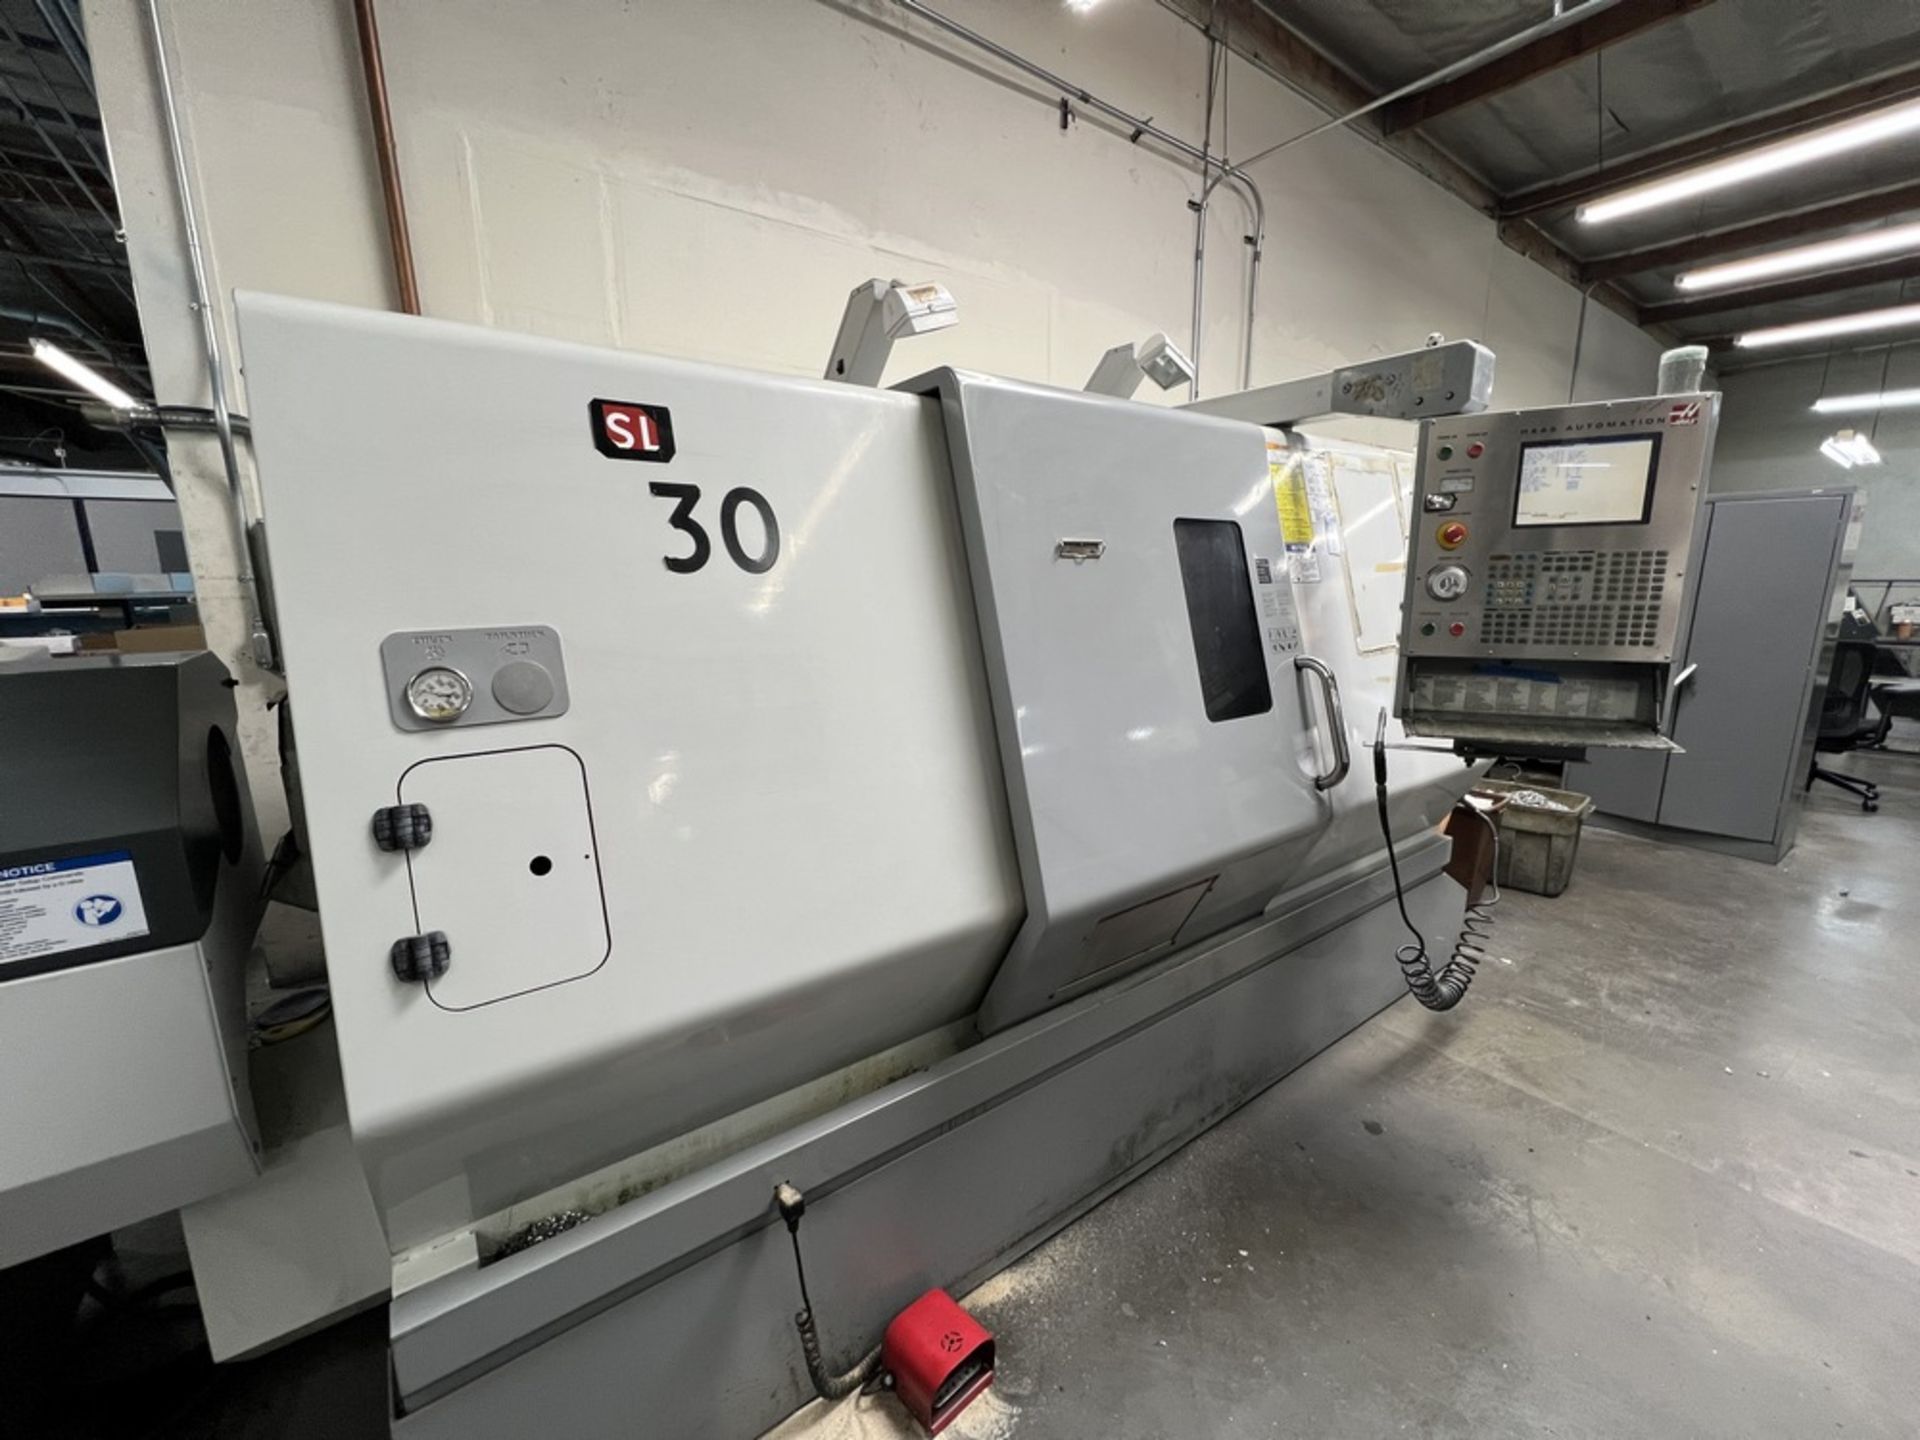 2006 Haas SL-30, CNC Lathe, Live Milling, 12 Station Turret, 10" 3 Jaw Chuck Tool Presetter, Chip - Image 5 of 28